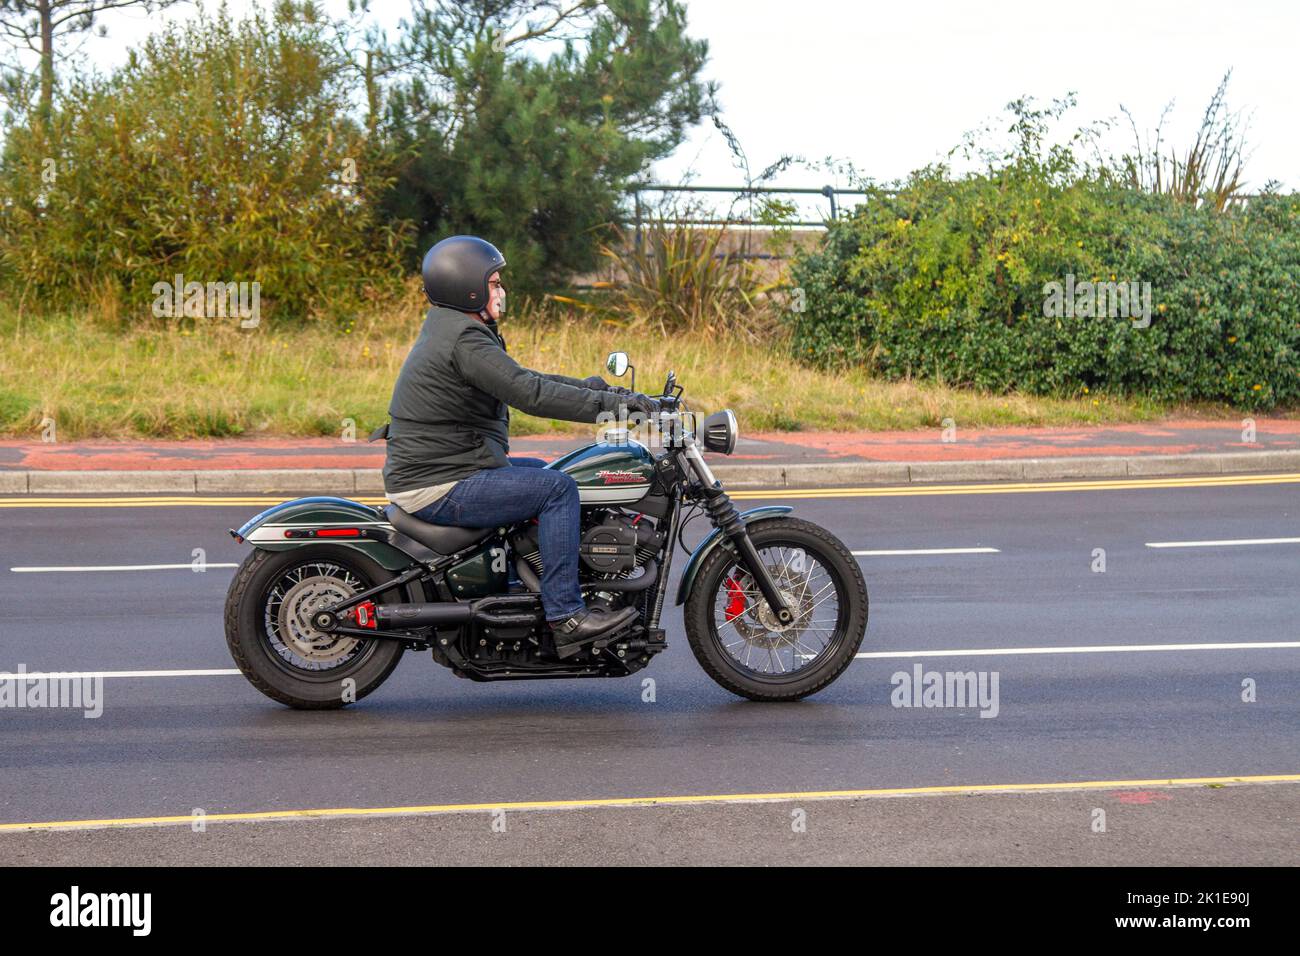 2018 HARLEY DAVIDSON FXBB STREET BOB 1745 cc,18 b, Milwaukee-Eight 107 V-twin; travelling to the Classic and speed event in Southport, UK Stock Photo